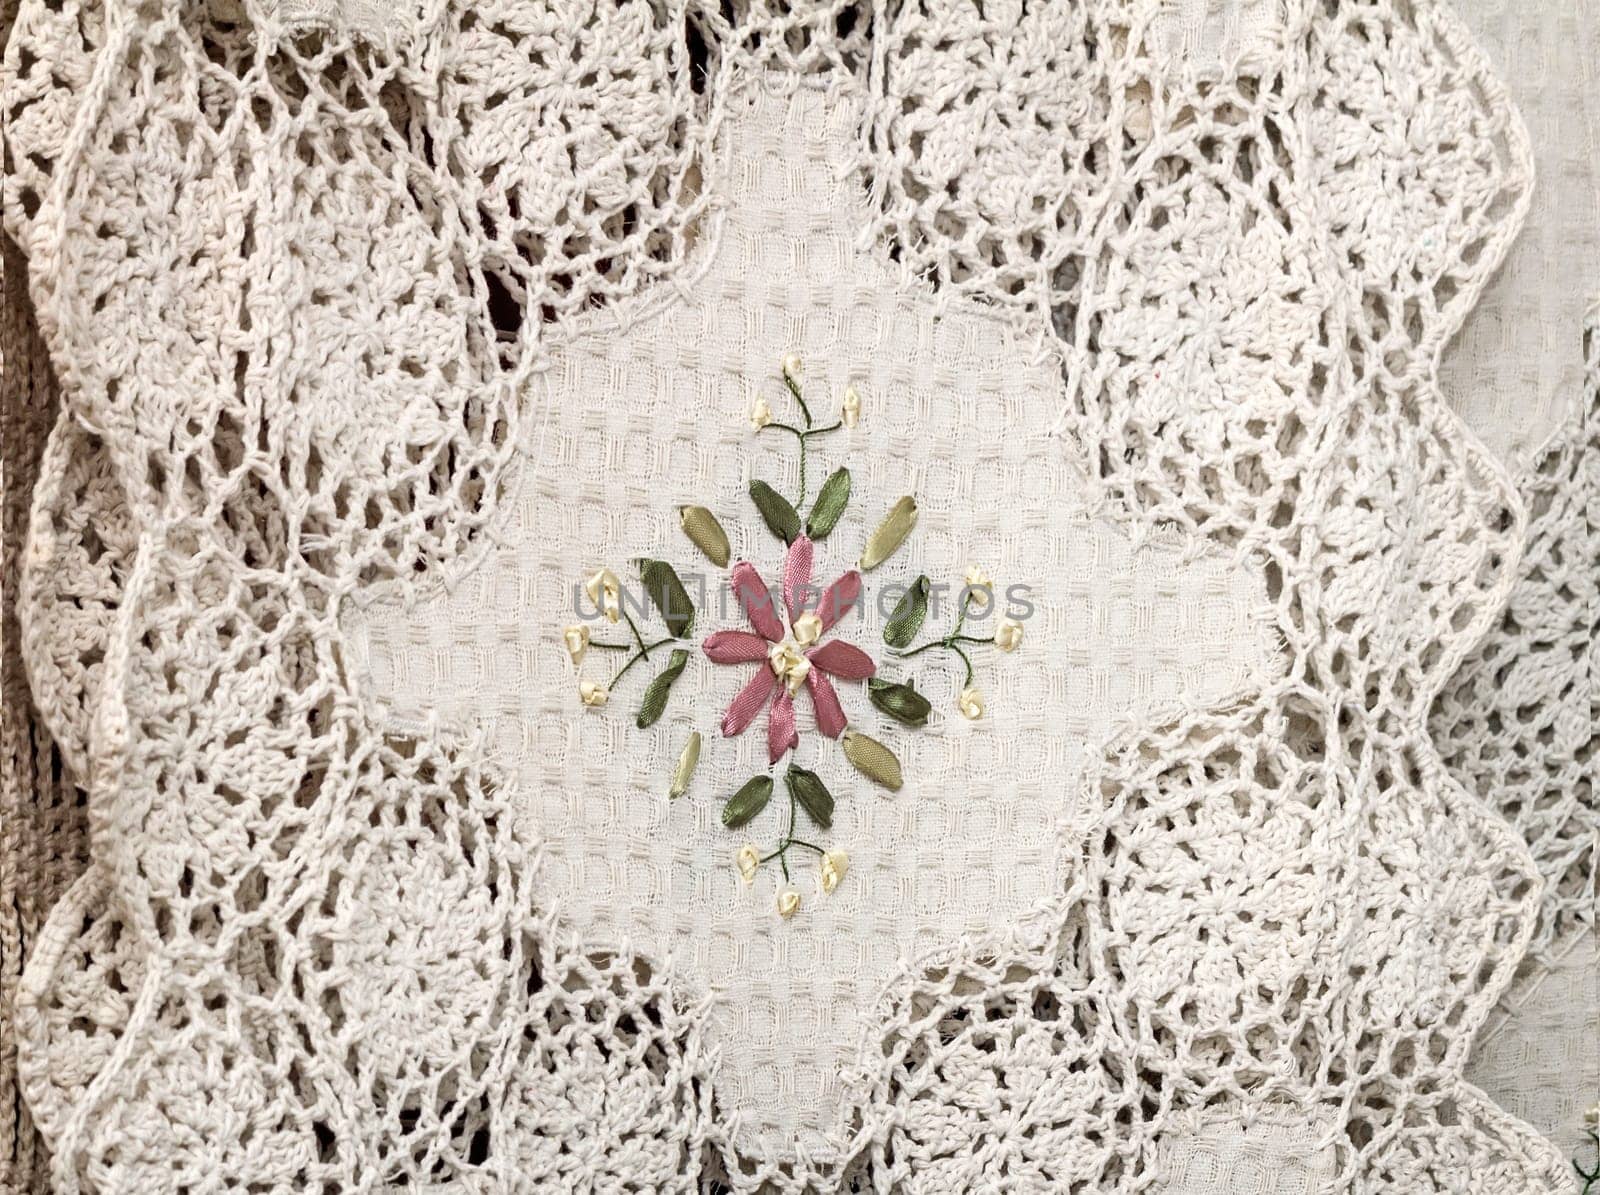 In the shop window of the beautiful tablecloths and napkins of flax, decorated with beautiful lace and embroidery.